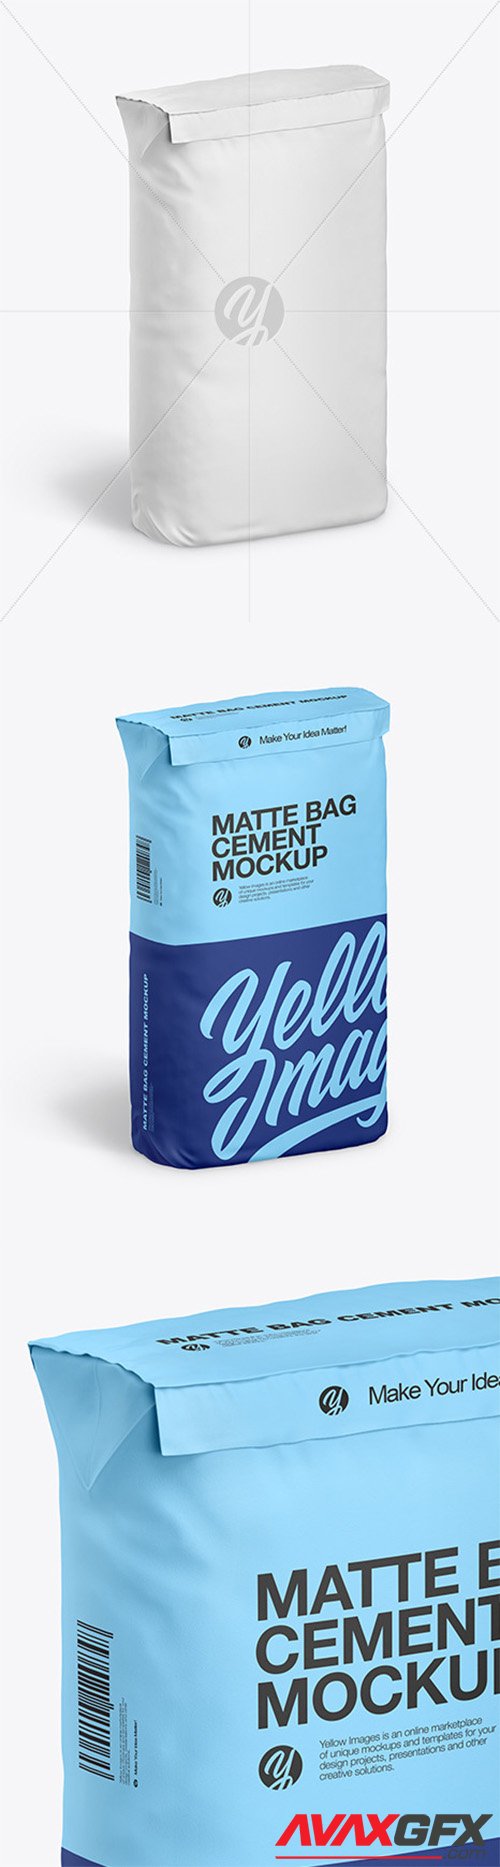 Download Matte Paper Cement Bag Mockup 57253 » AVAXGFX - All ...